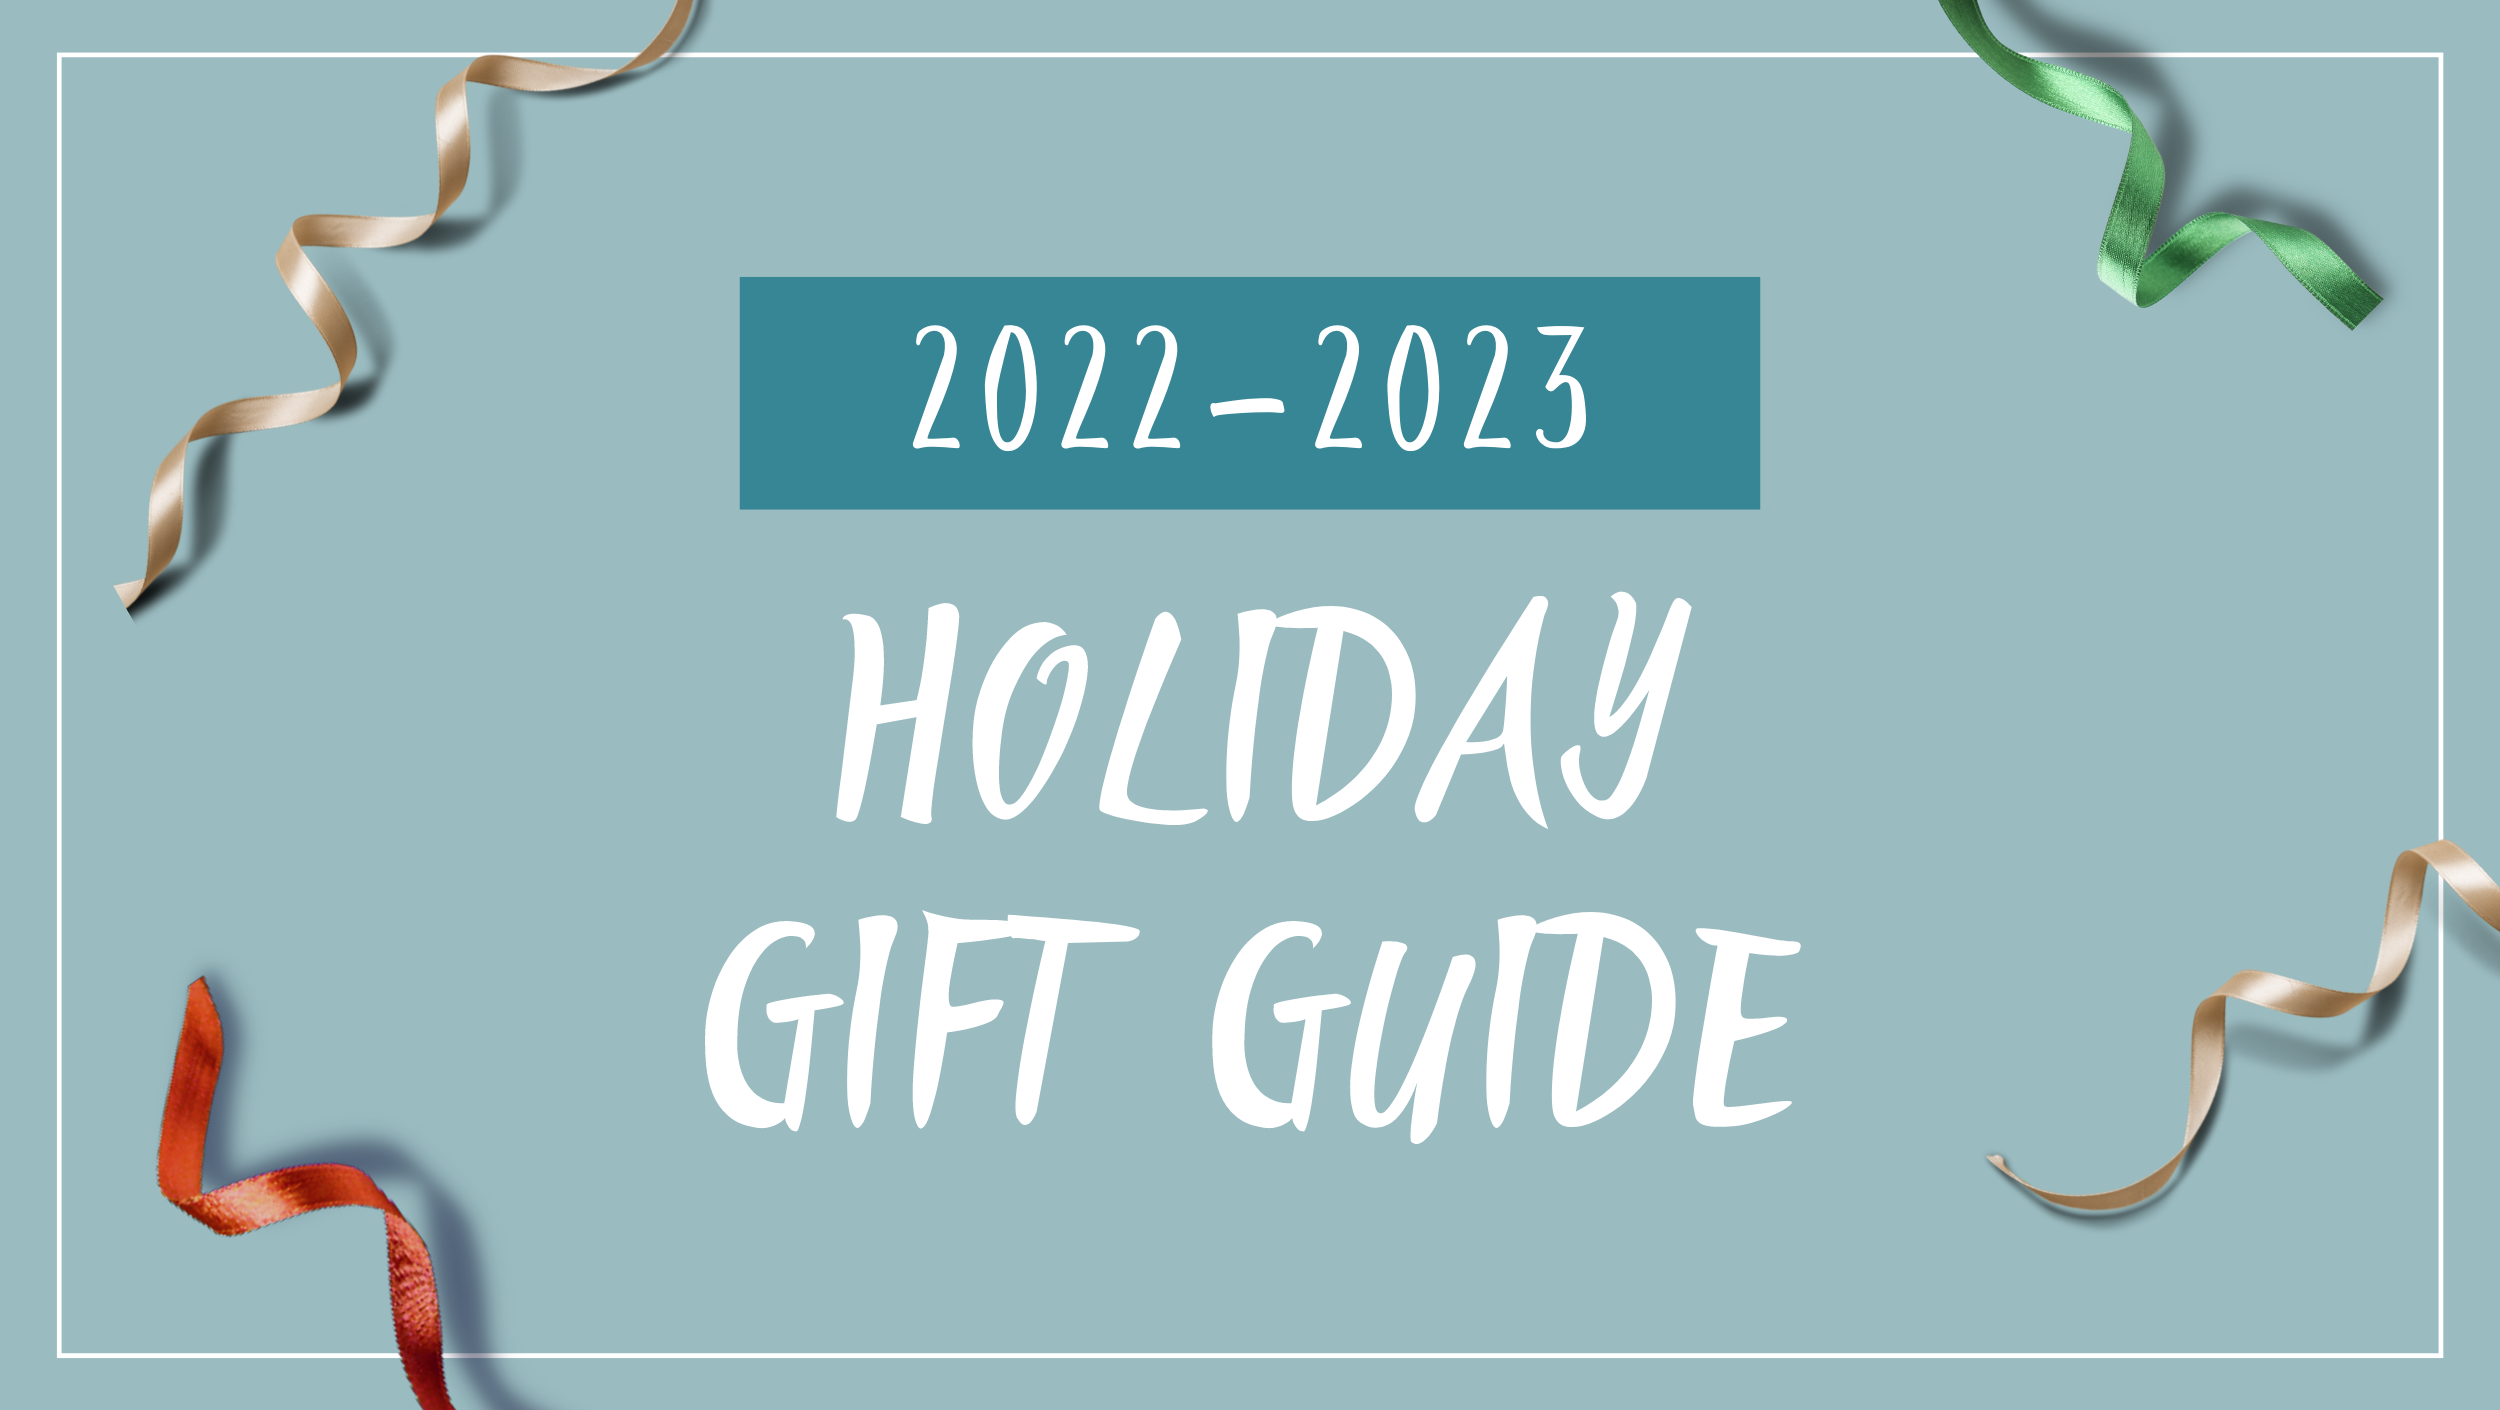 Holiday Gift Guide 2022: Kayakers, SUPers & Packrafters